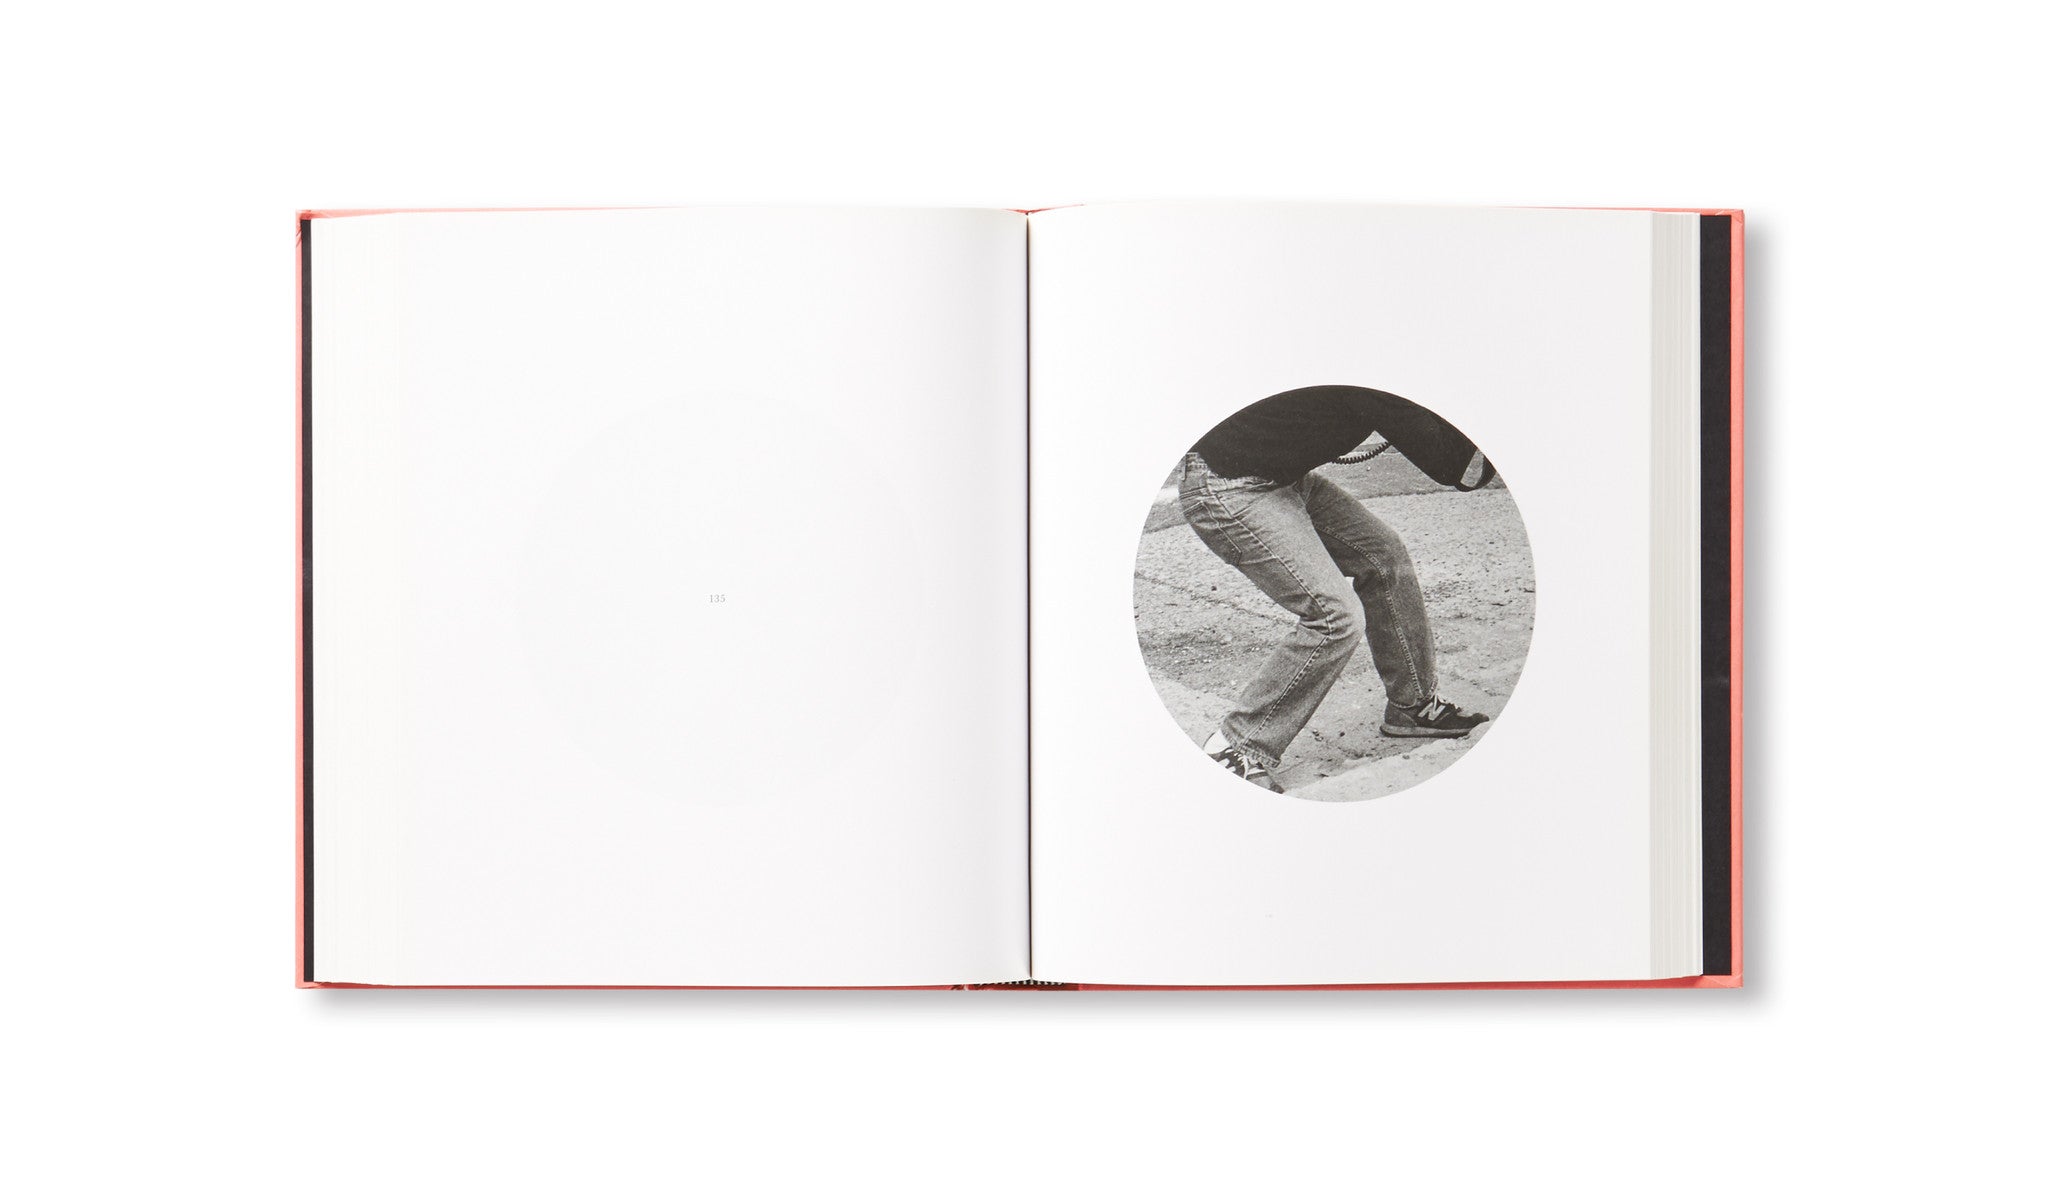 PEOPLE IN TROUBLE LAUGHING PUSHED TO THE GROUND by Adam Broomberg & Oliver Chanarin